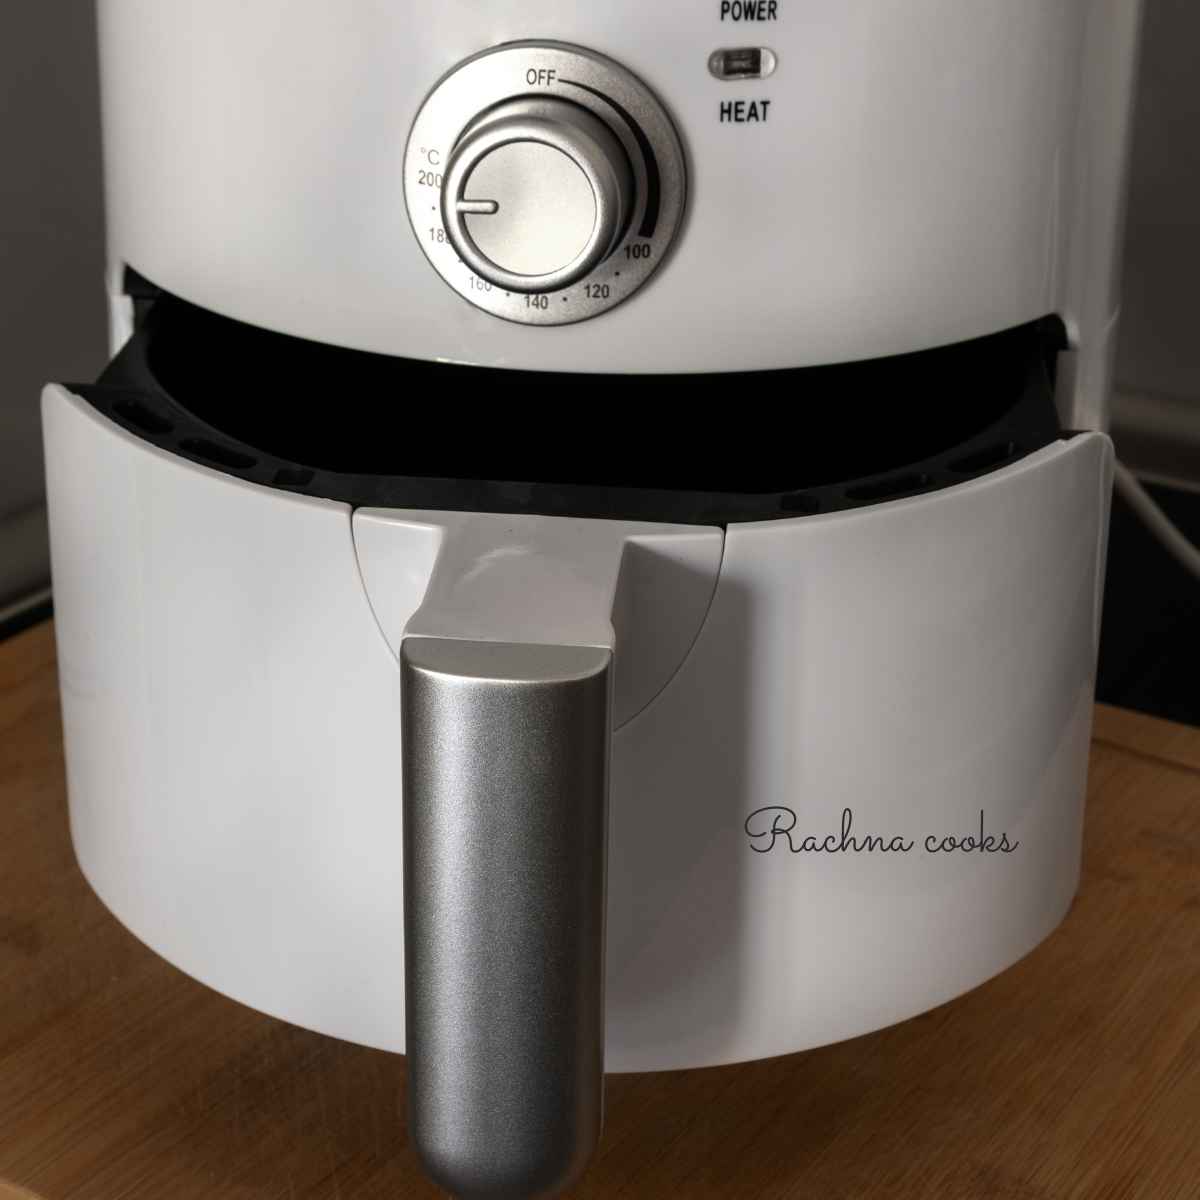 air fryer with knob visible